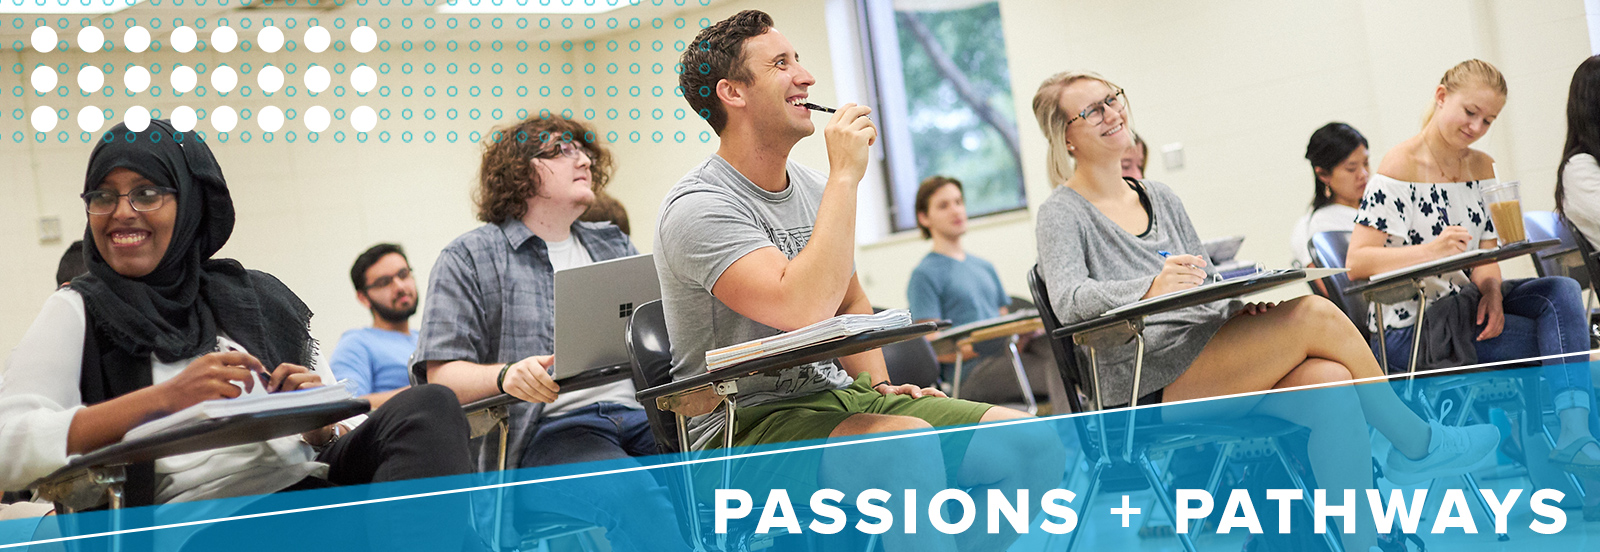 Passions + Pathways (image of students in classroom)